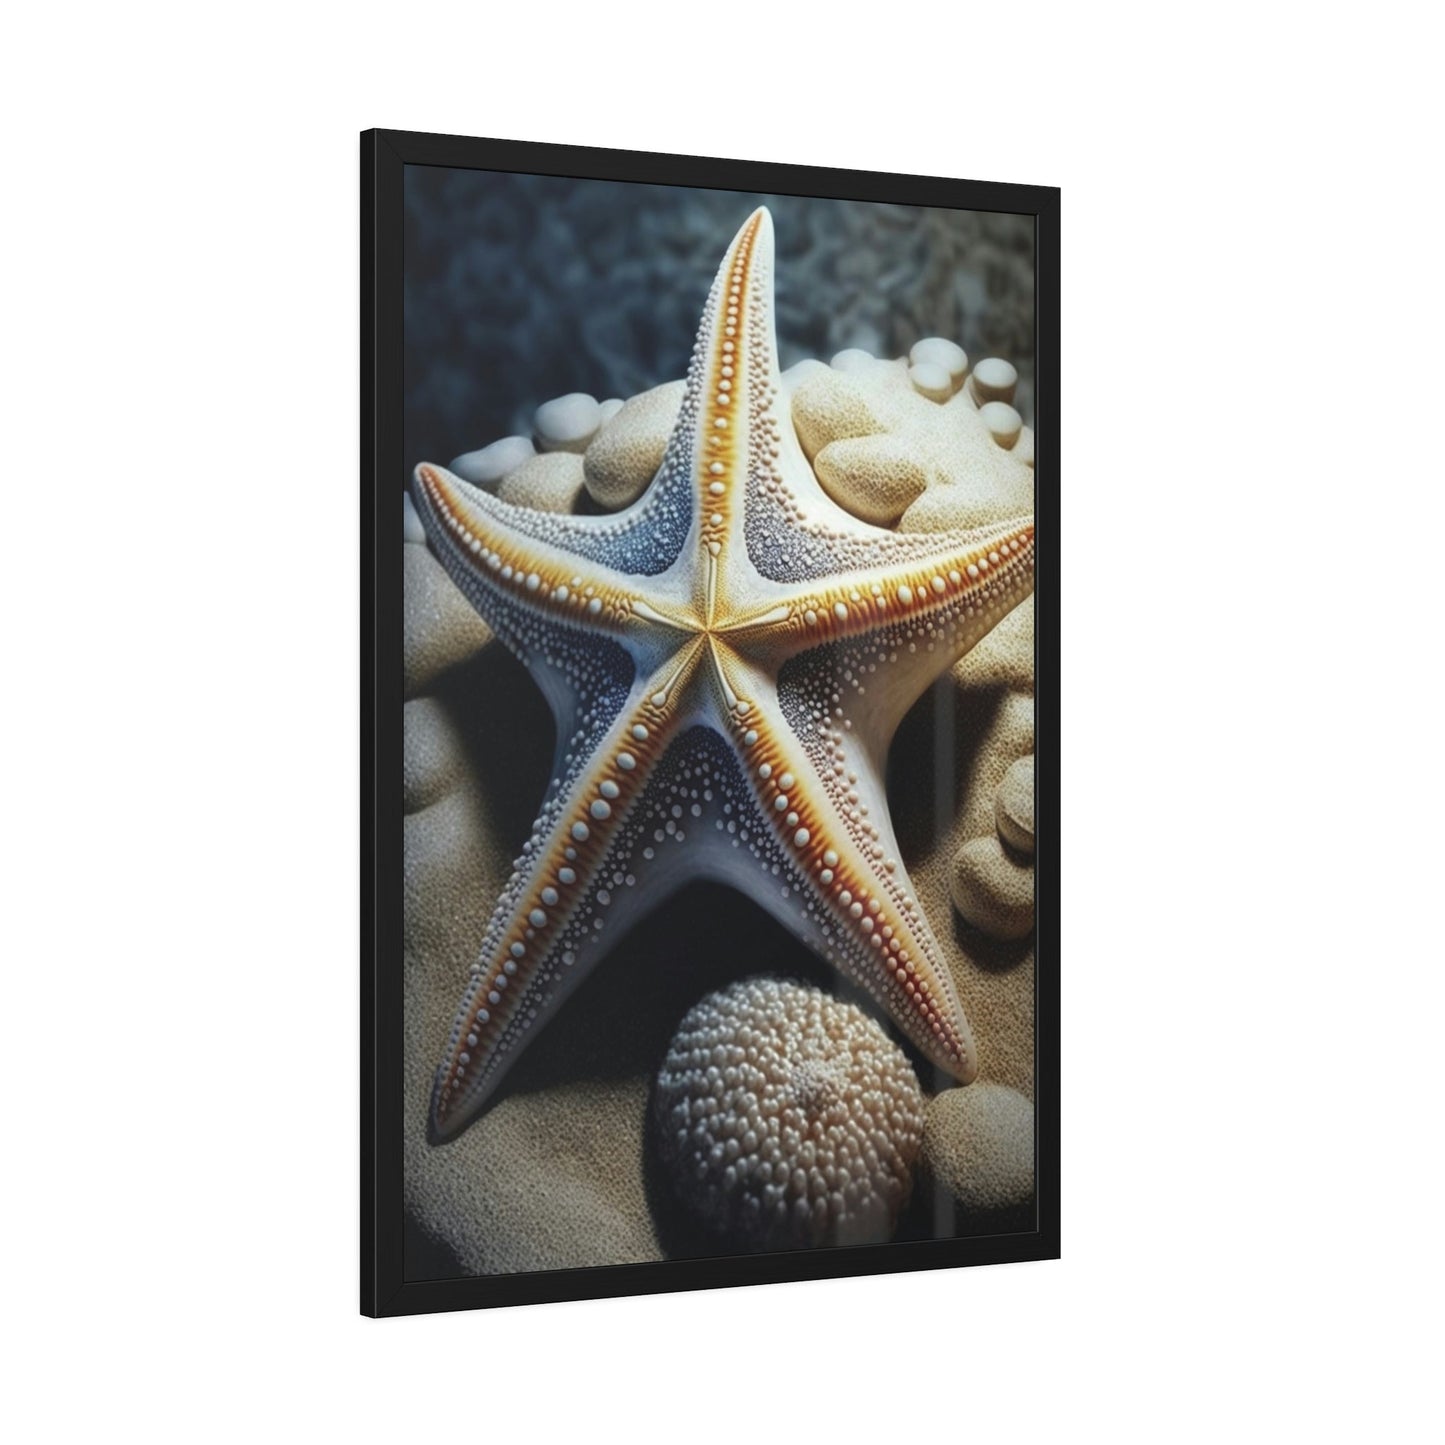 Starfish Dreams: A Voyage to the Depths of Imagination